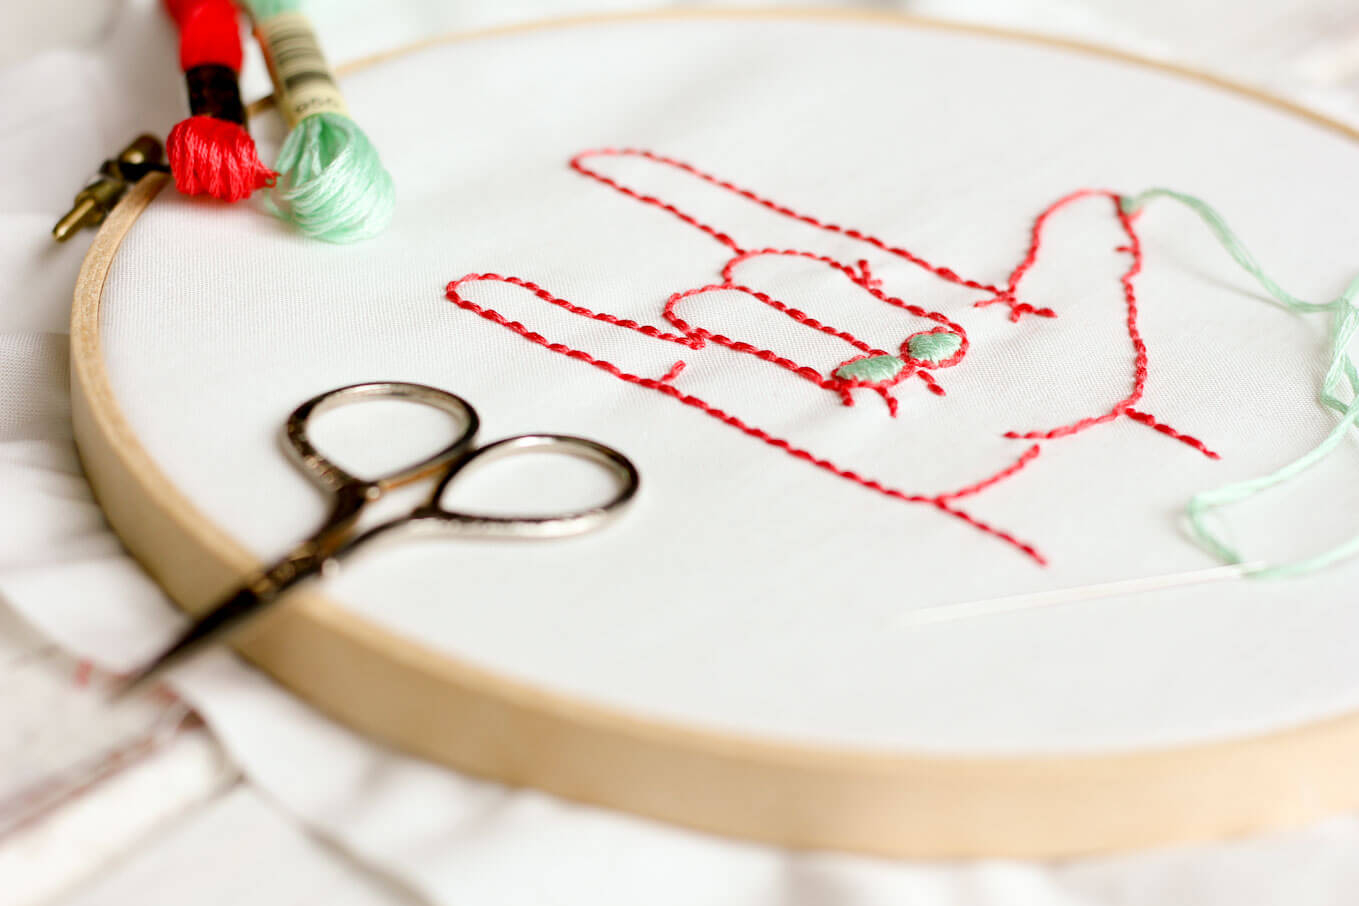 How To Make An Embroidery Pattern I Love You Free Embroidery Pattern Make Do Crew